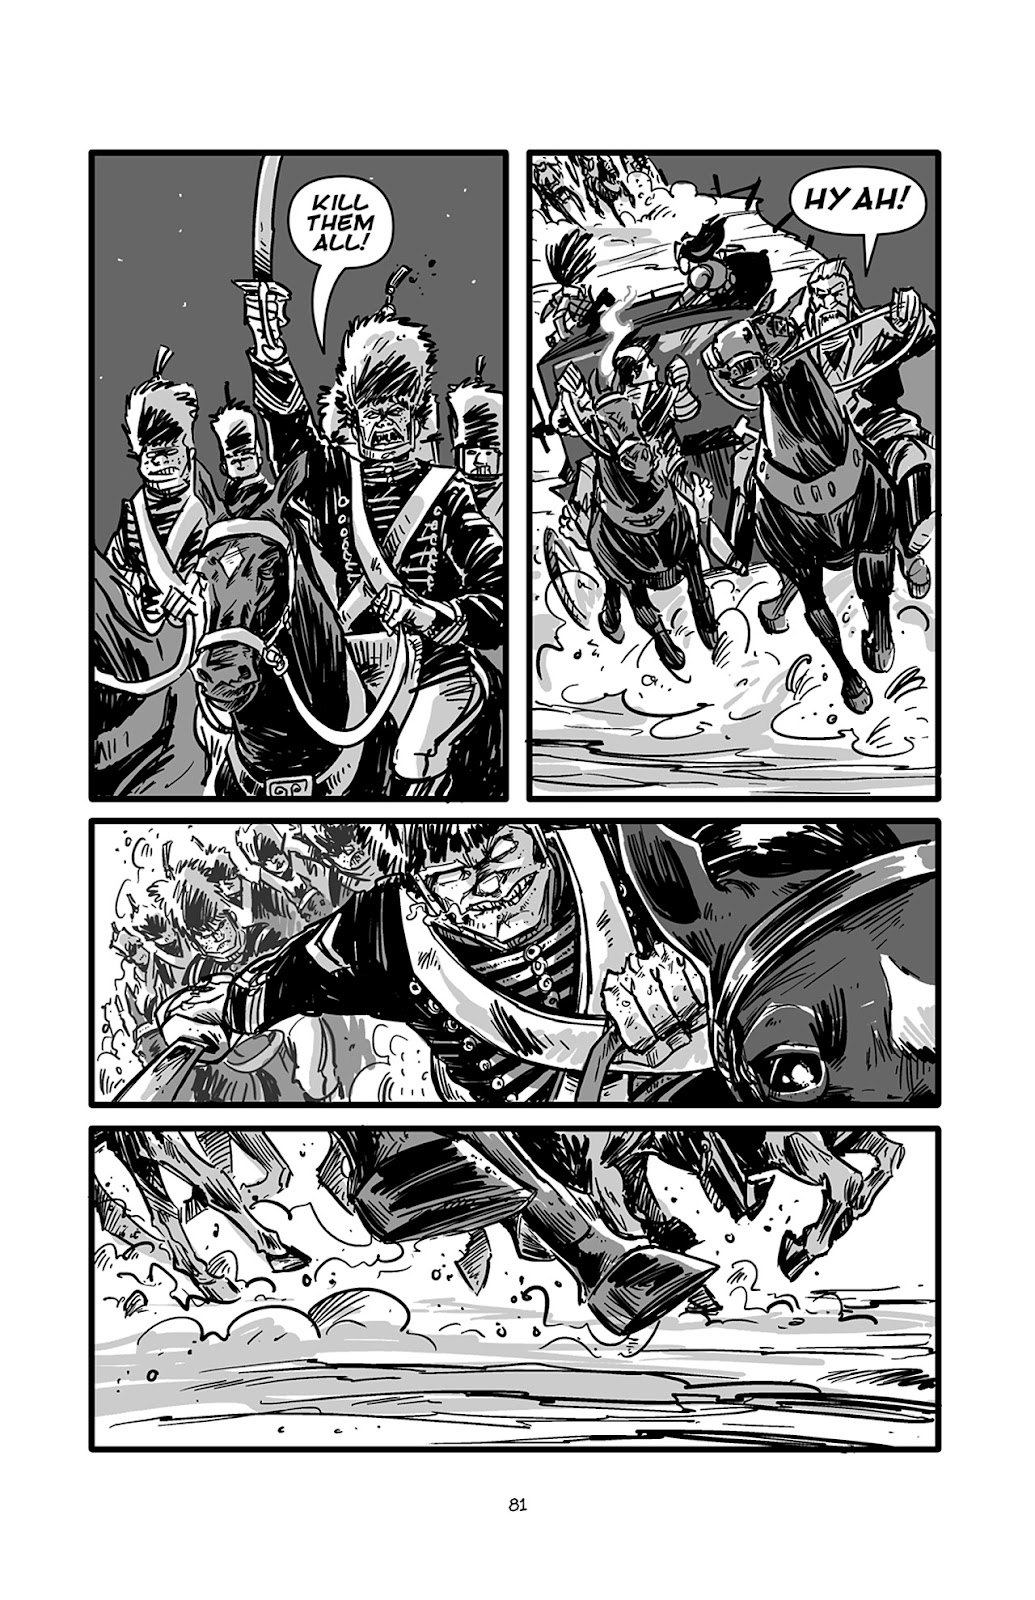 Pinocchio: Vampire Slayer - Of Wood and Blood issue 4 - Page 8